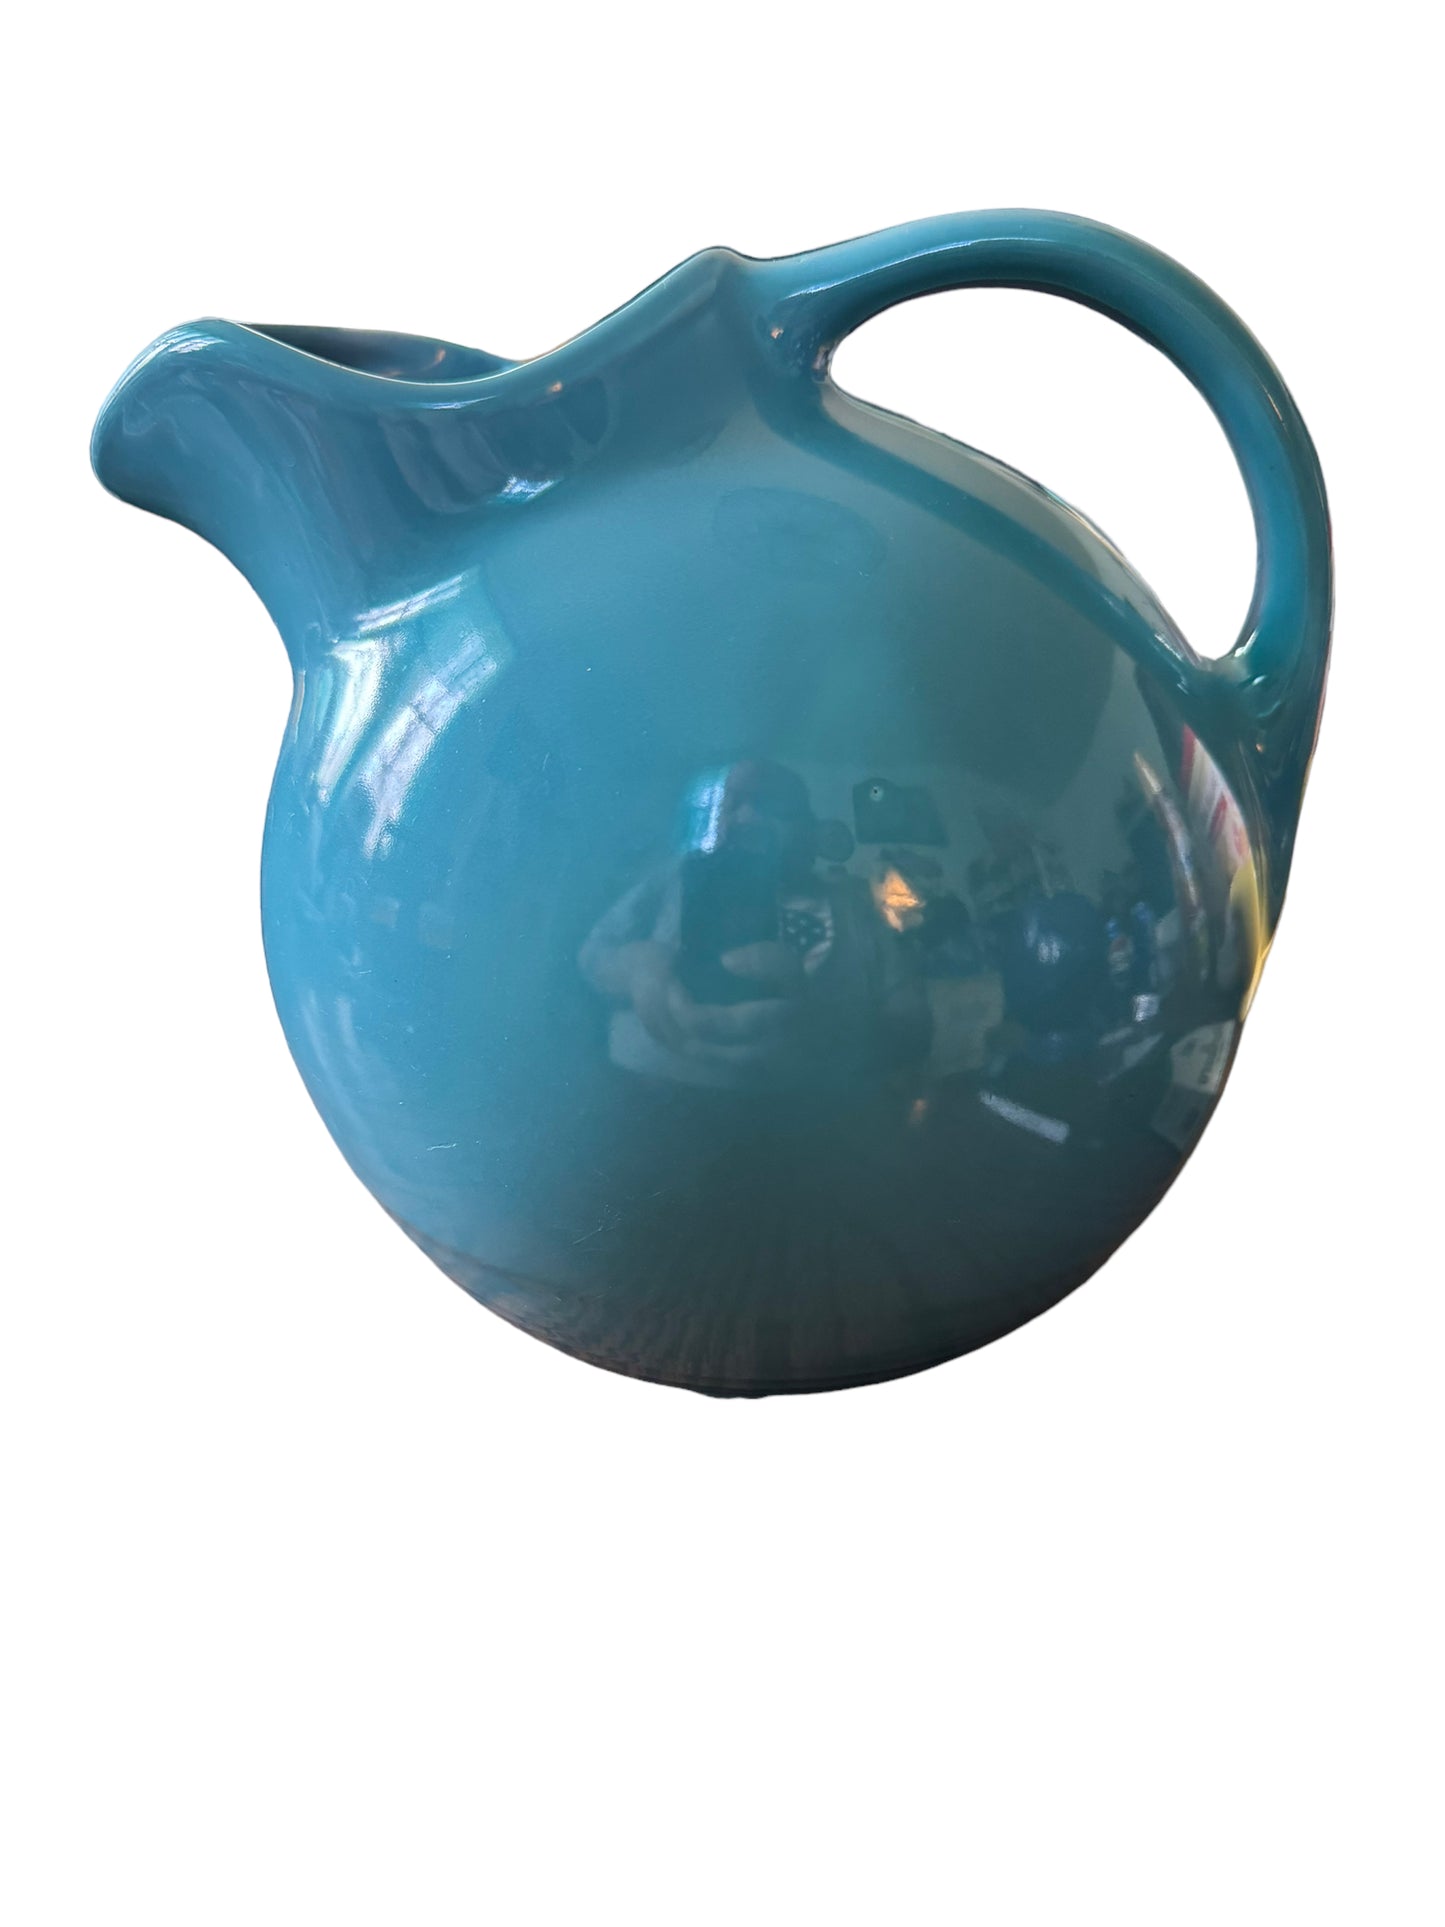 Fiesta Harlequin Ball Pitcher / Jug in Turquoise Blue